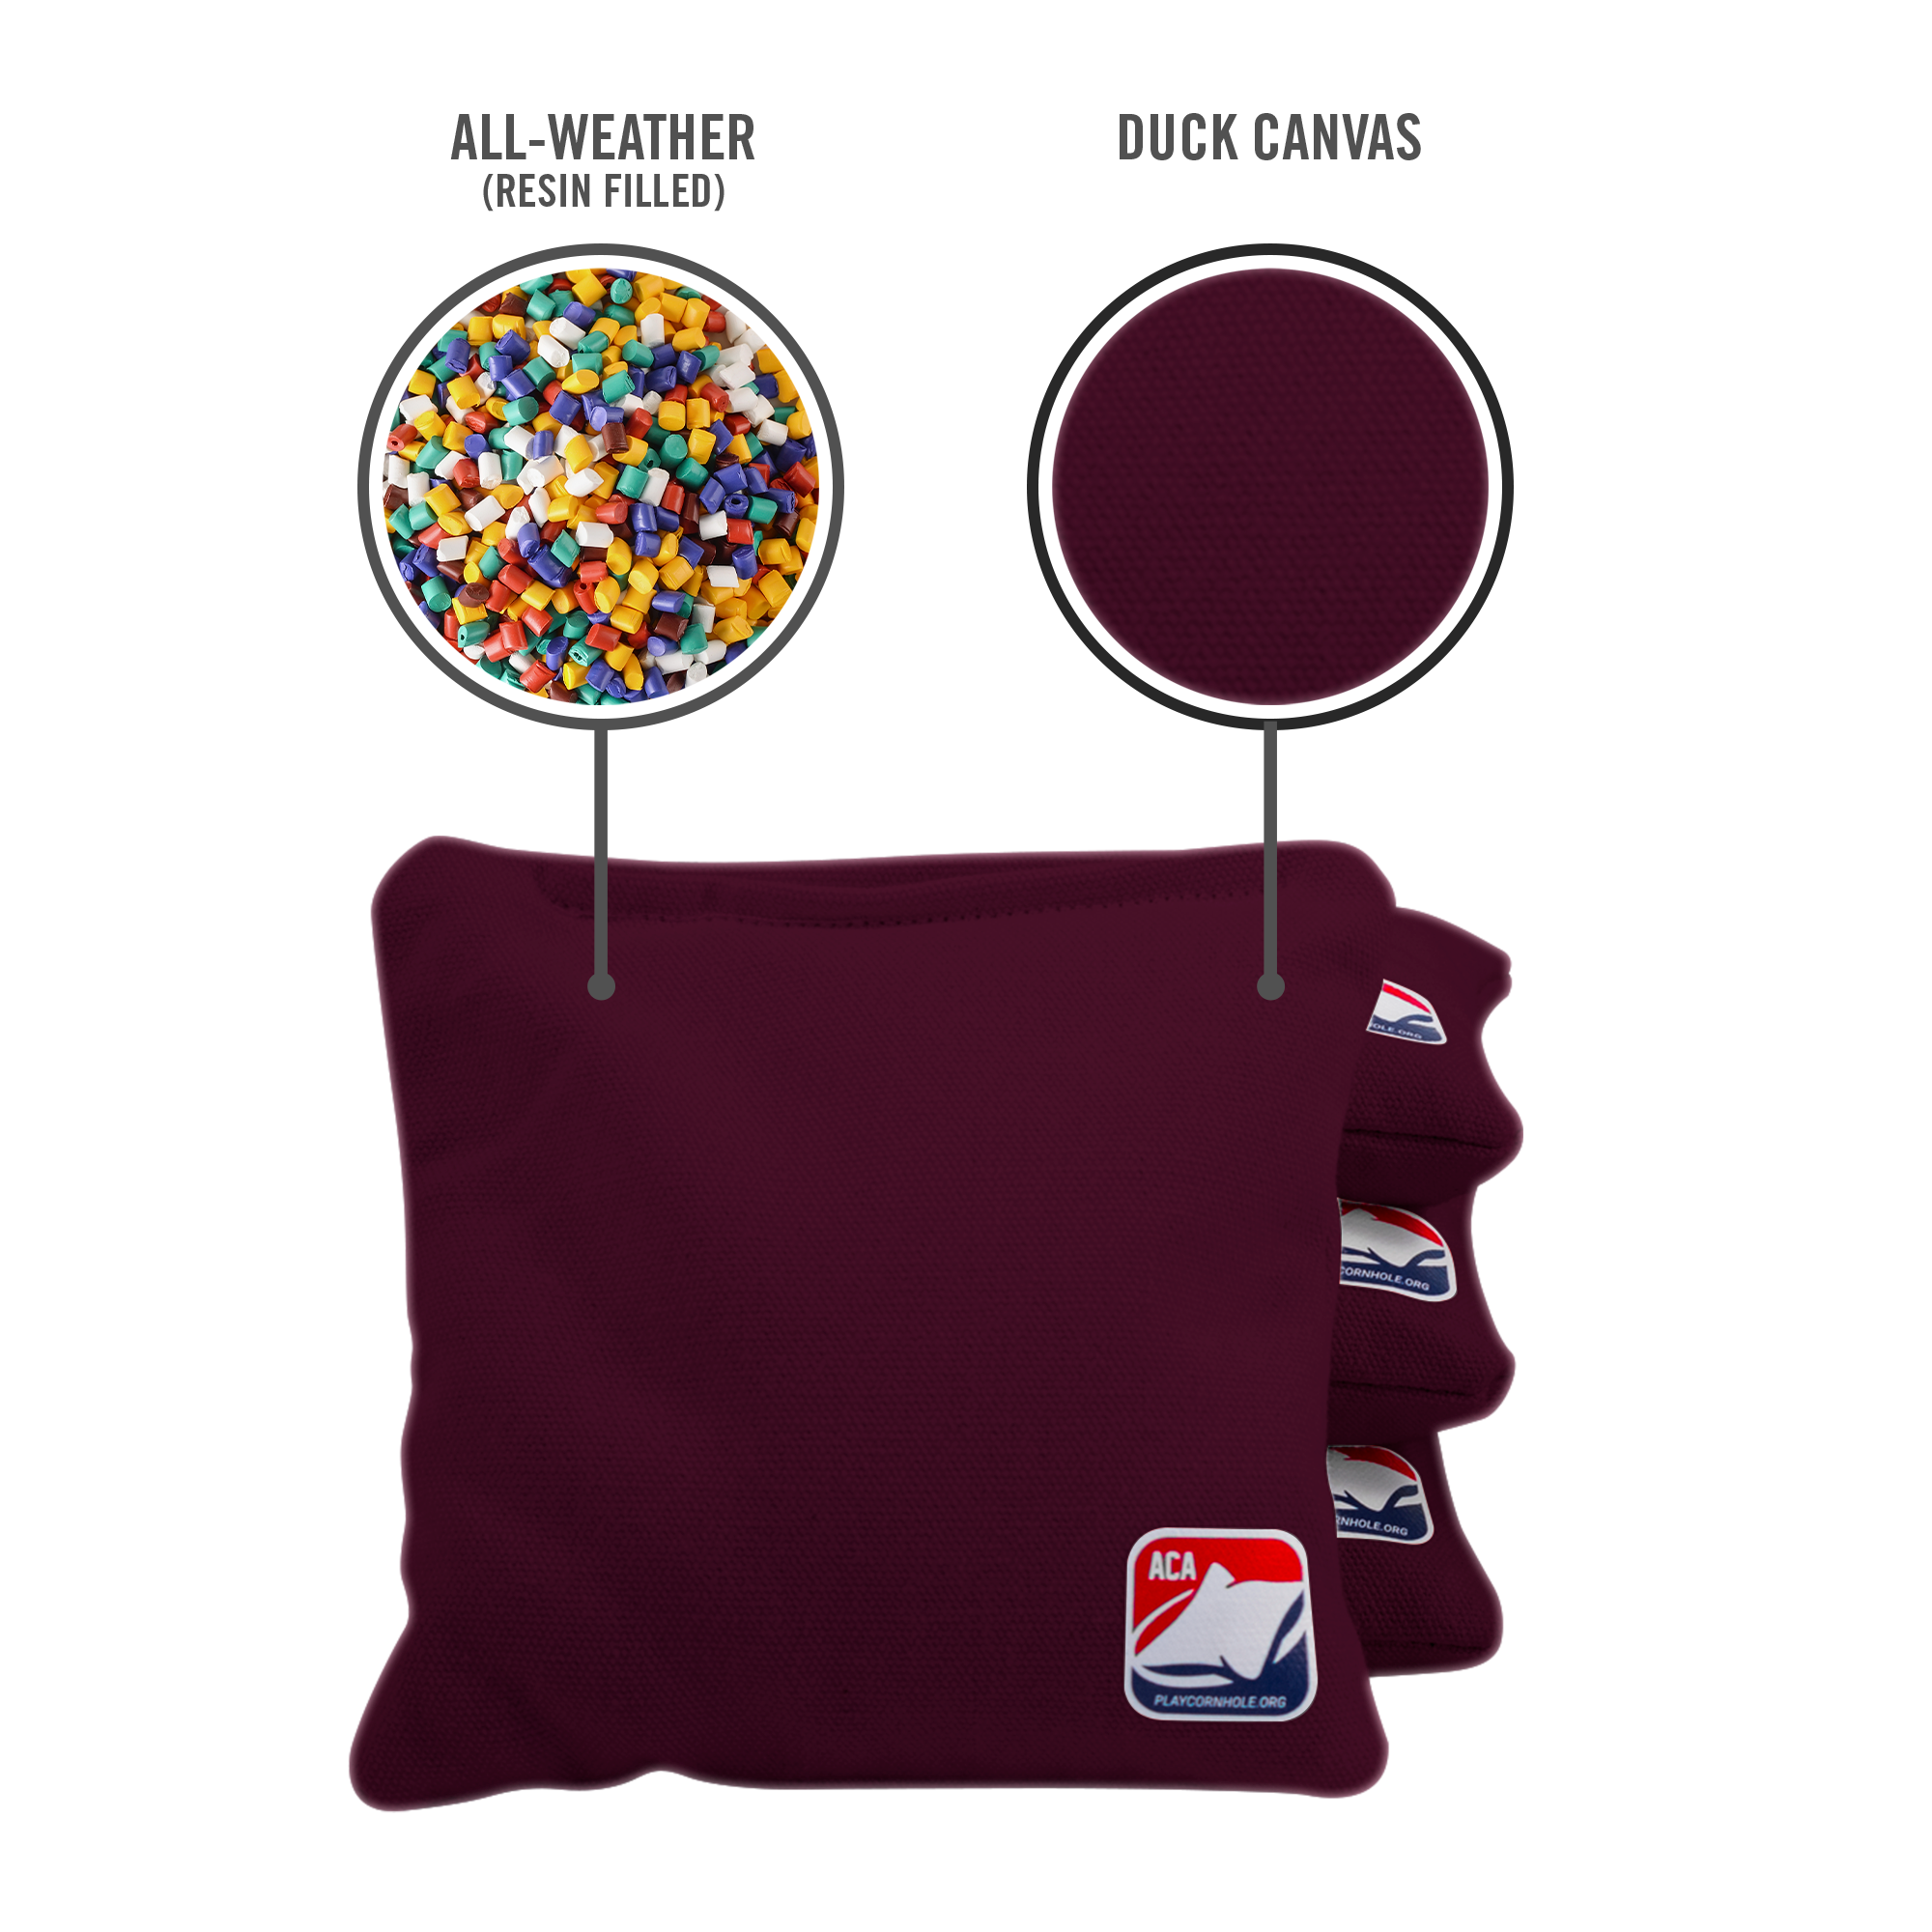 6-in Daily 66x Burgundy Competition Regulation Cornhole Bags